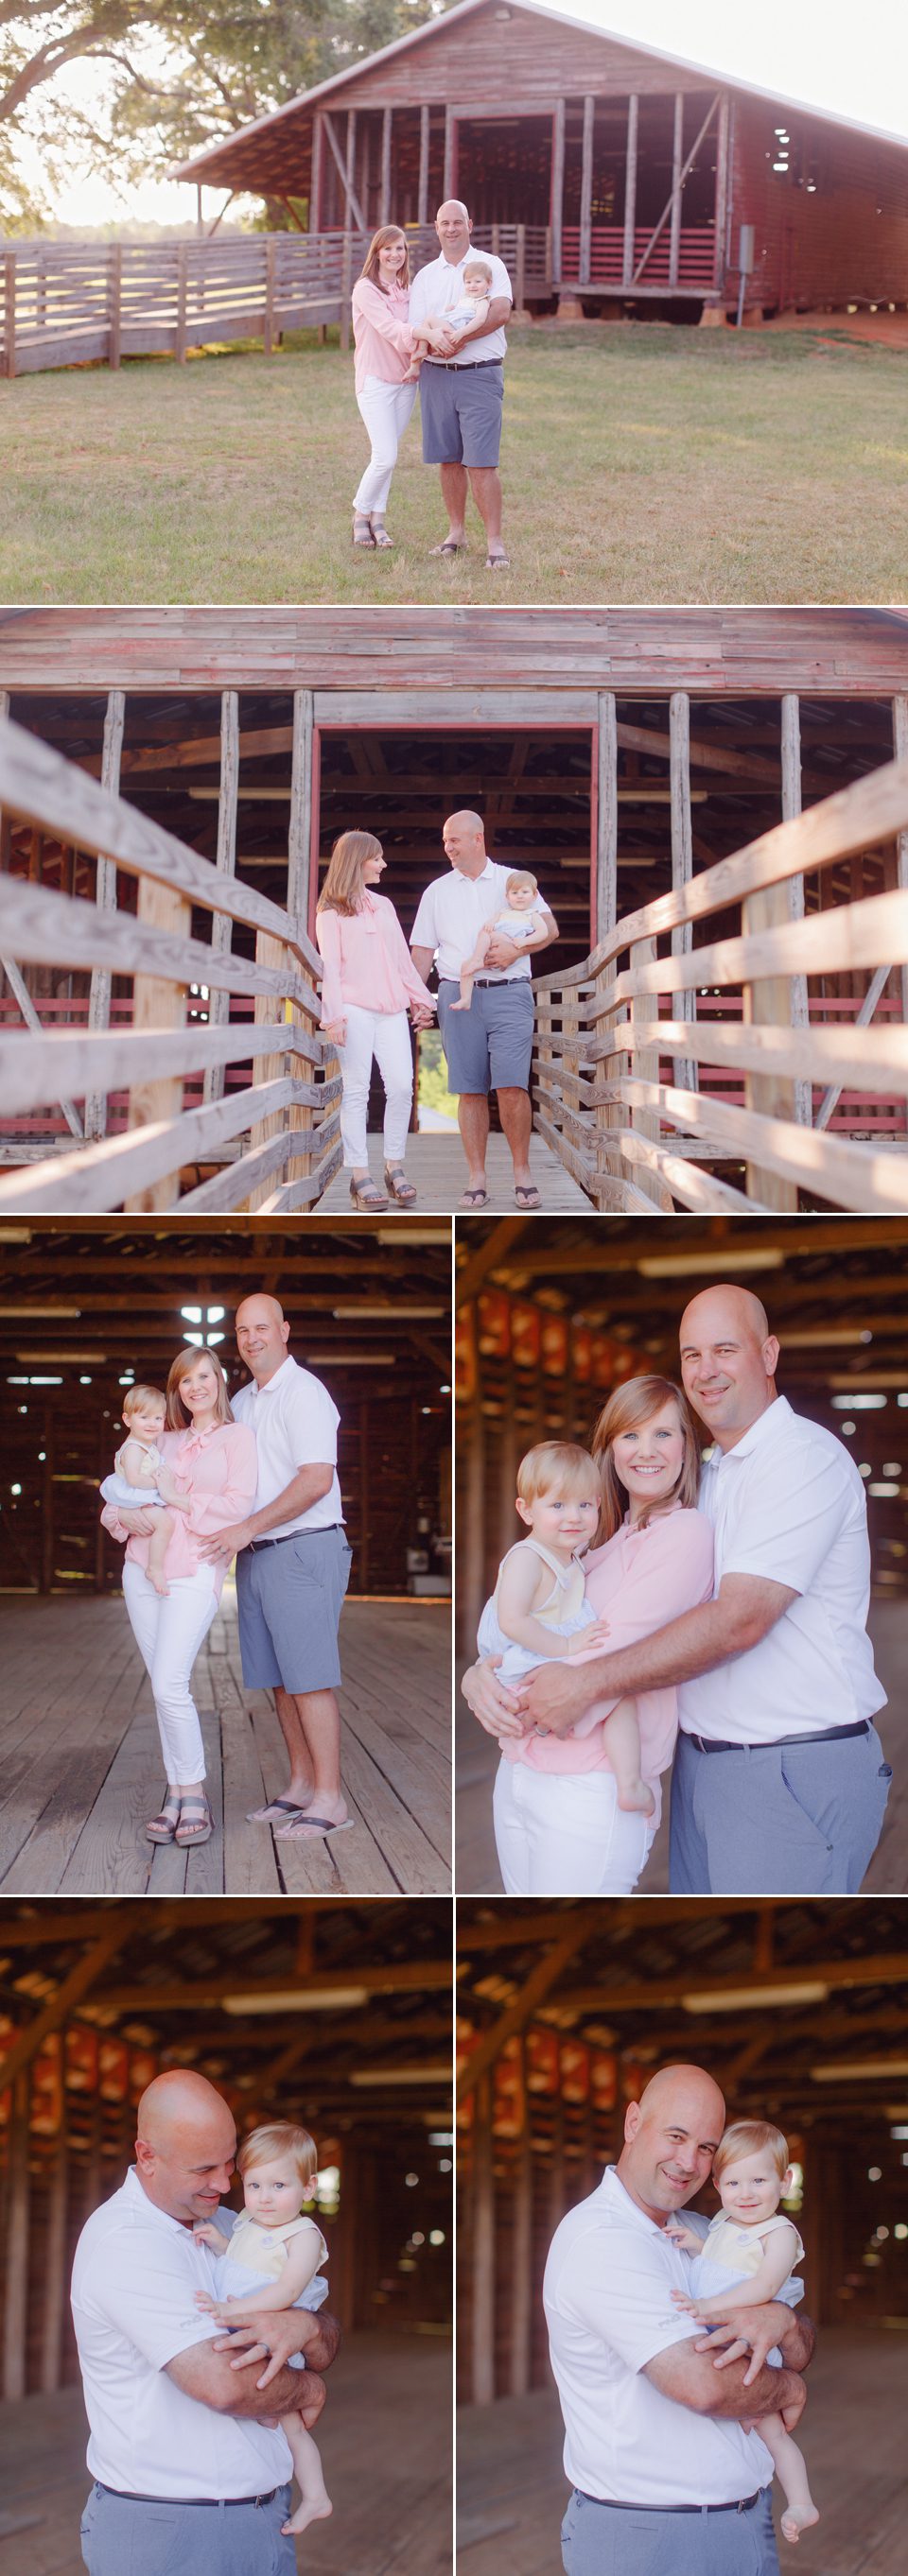 Spring family portraits in a barn in Tuscaloosa, AL.